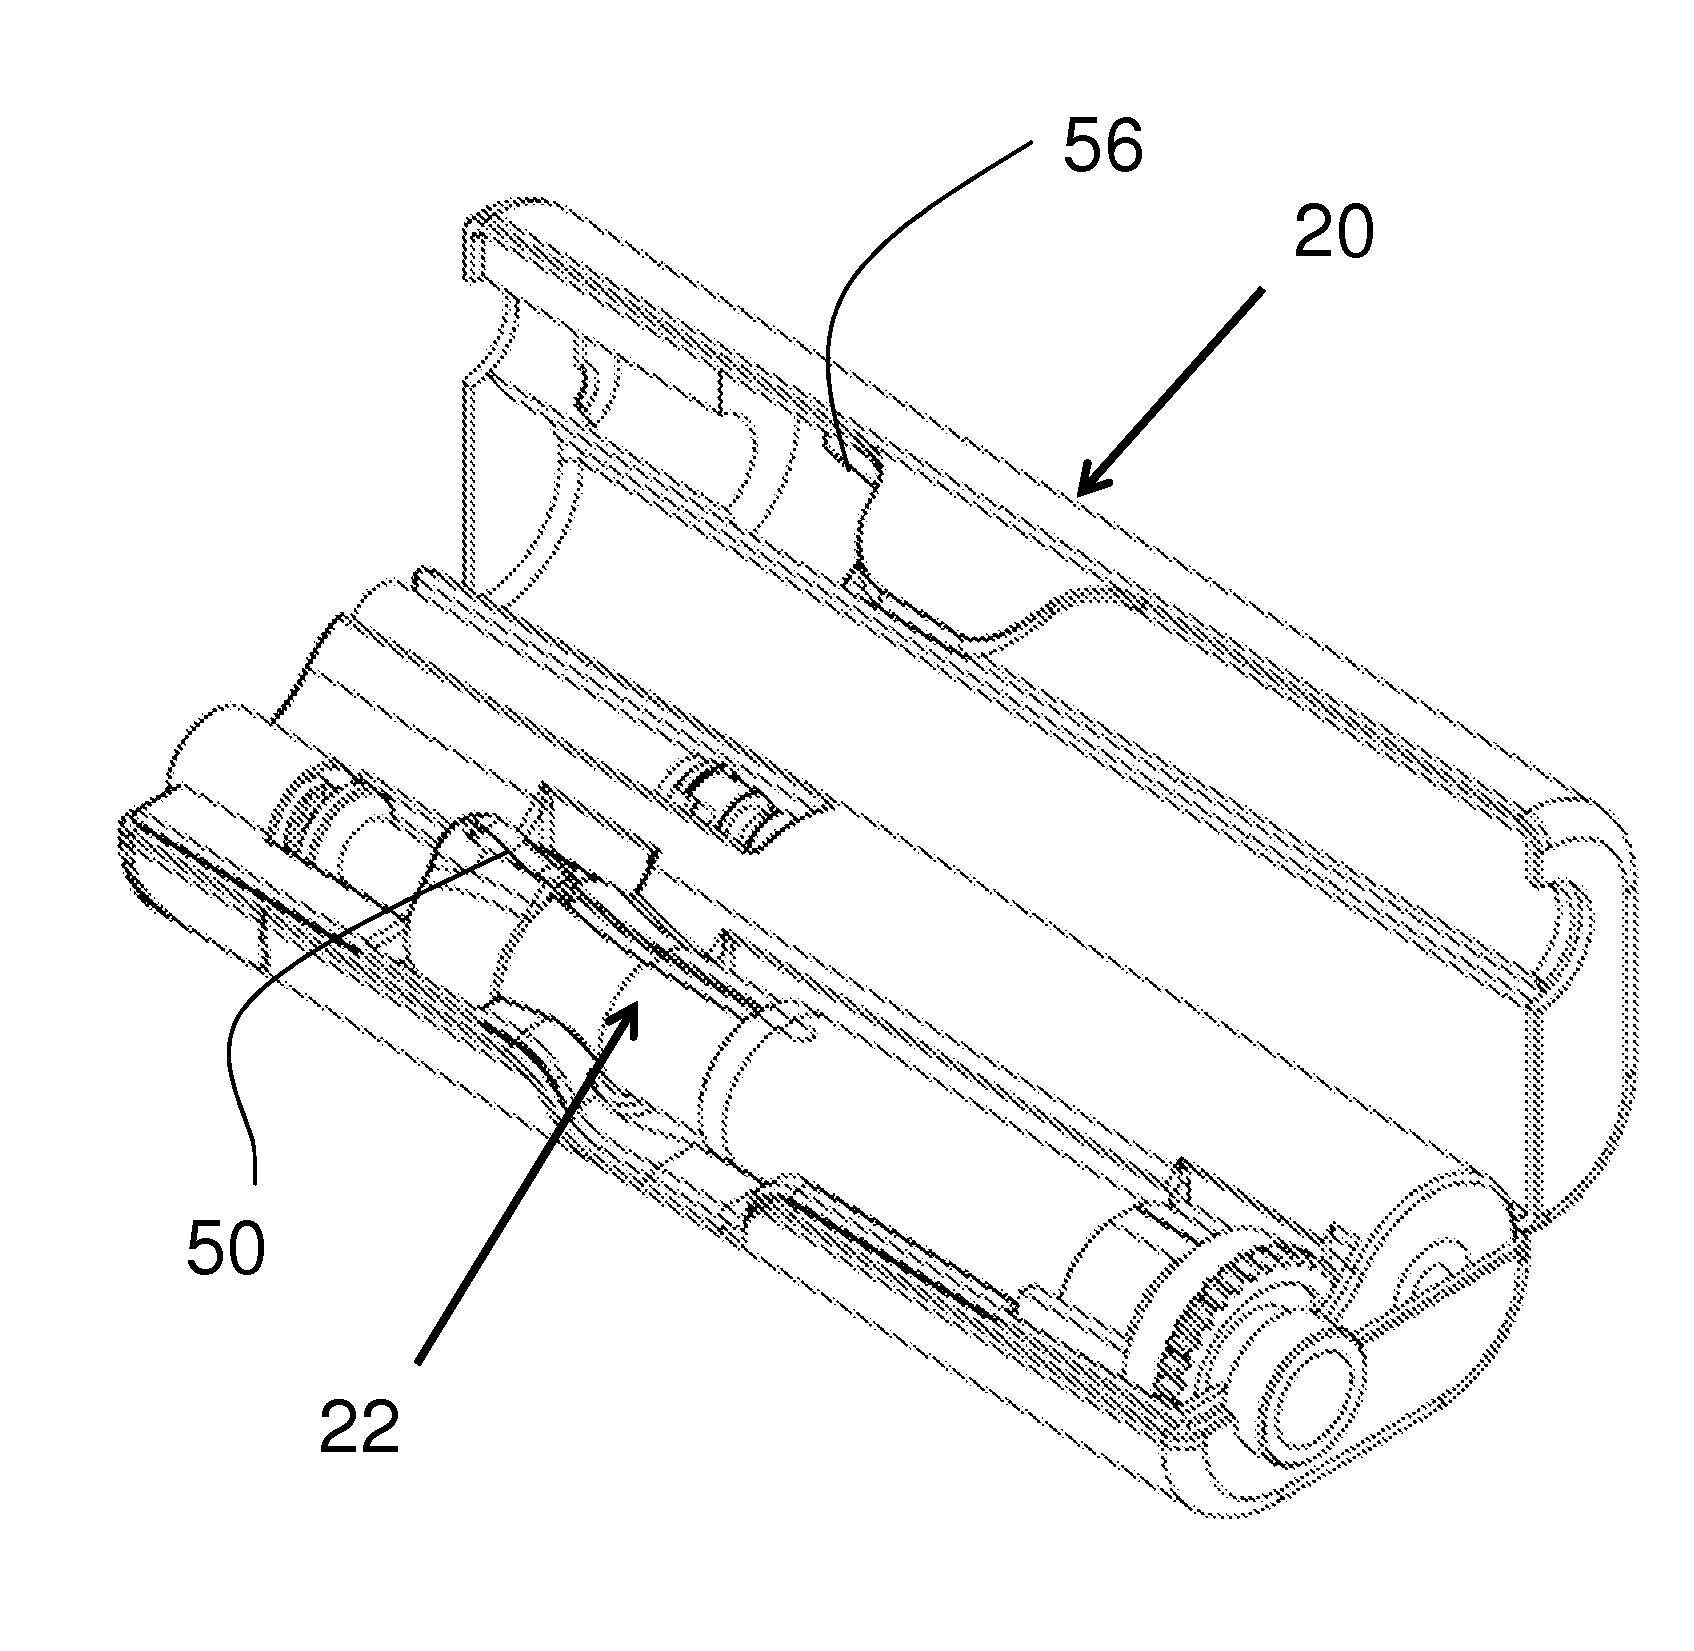 Electrical needle-free injector system